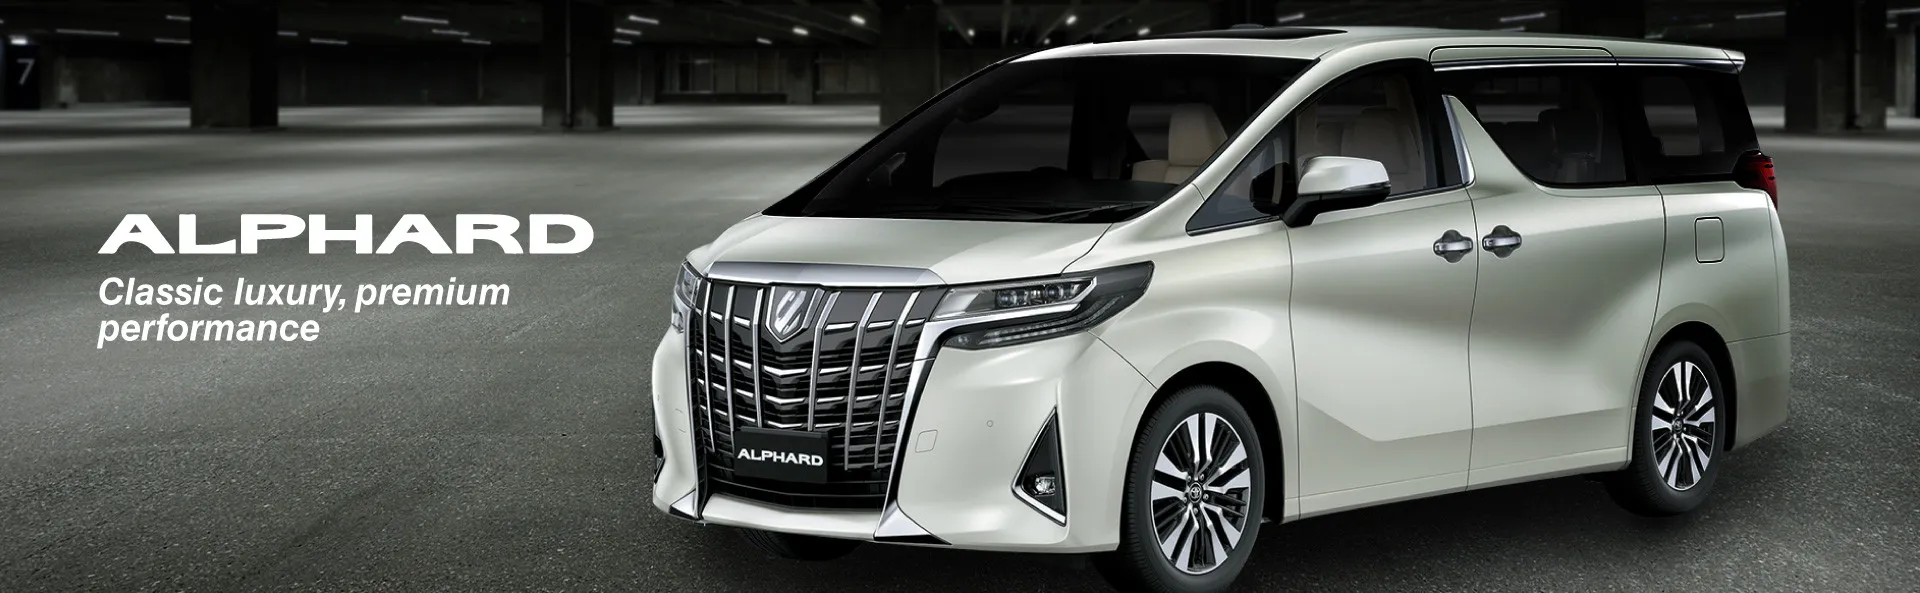 insurance cost of expensive cars in the philippines - Toyota Alphard